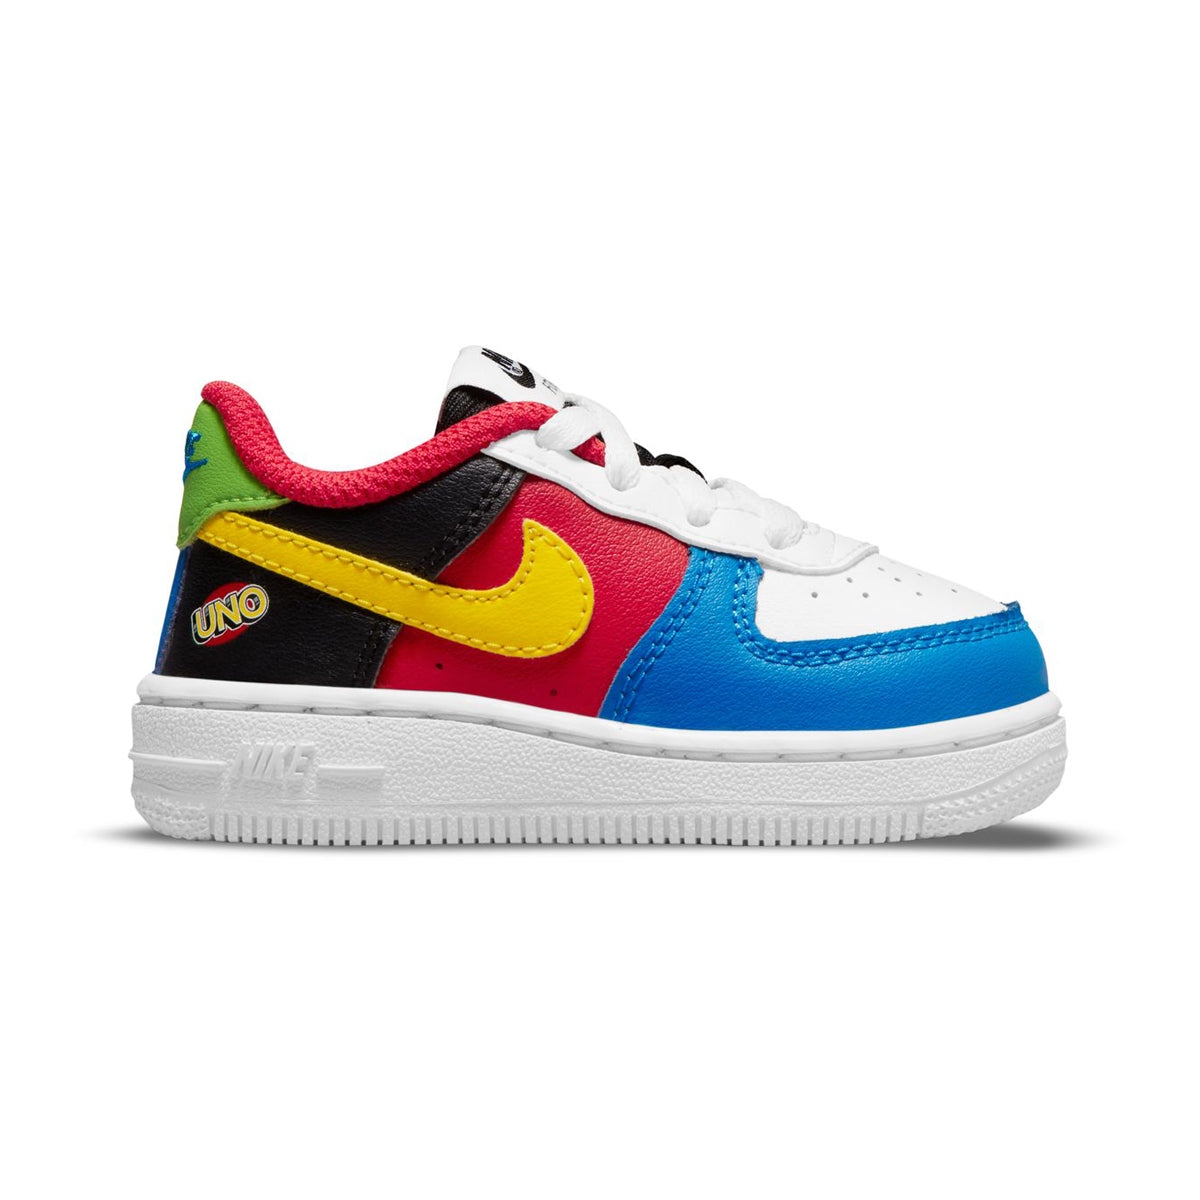 Nike air force 1 🔥 Pointures disponibles : 36 ll 40